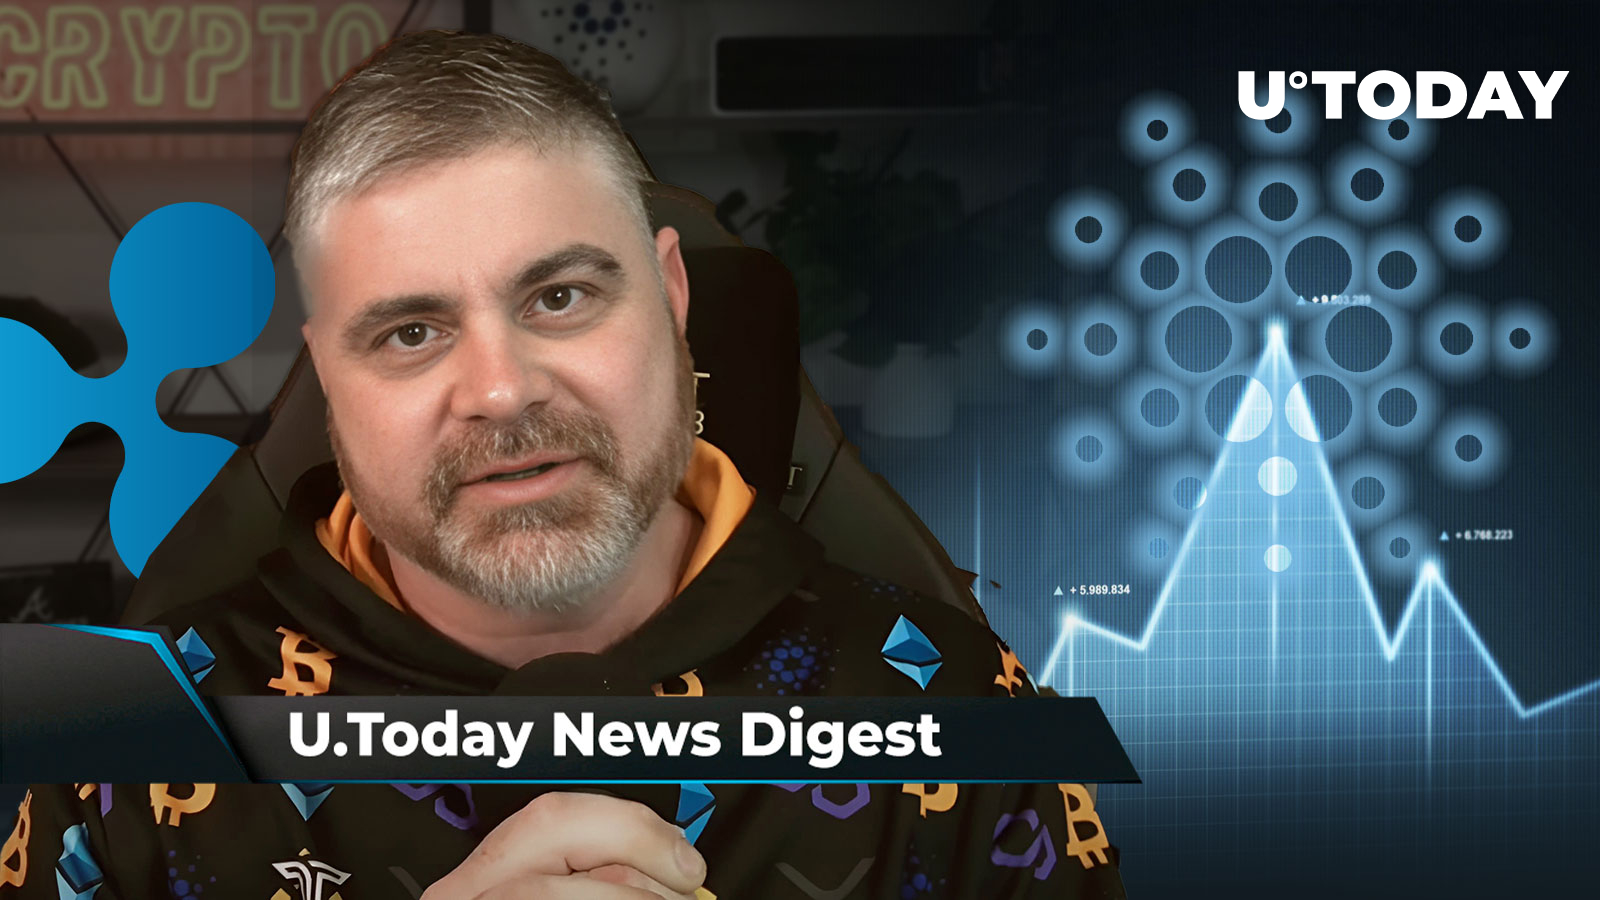 shib-lead-hints-at-game-changing-move-youtuber-bitboy-crypto-says-ripple-case-verdict-imminent-ada-flashes-head-and-shoulders-pattern-crypto-news-digest-by-u-today